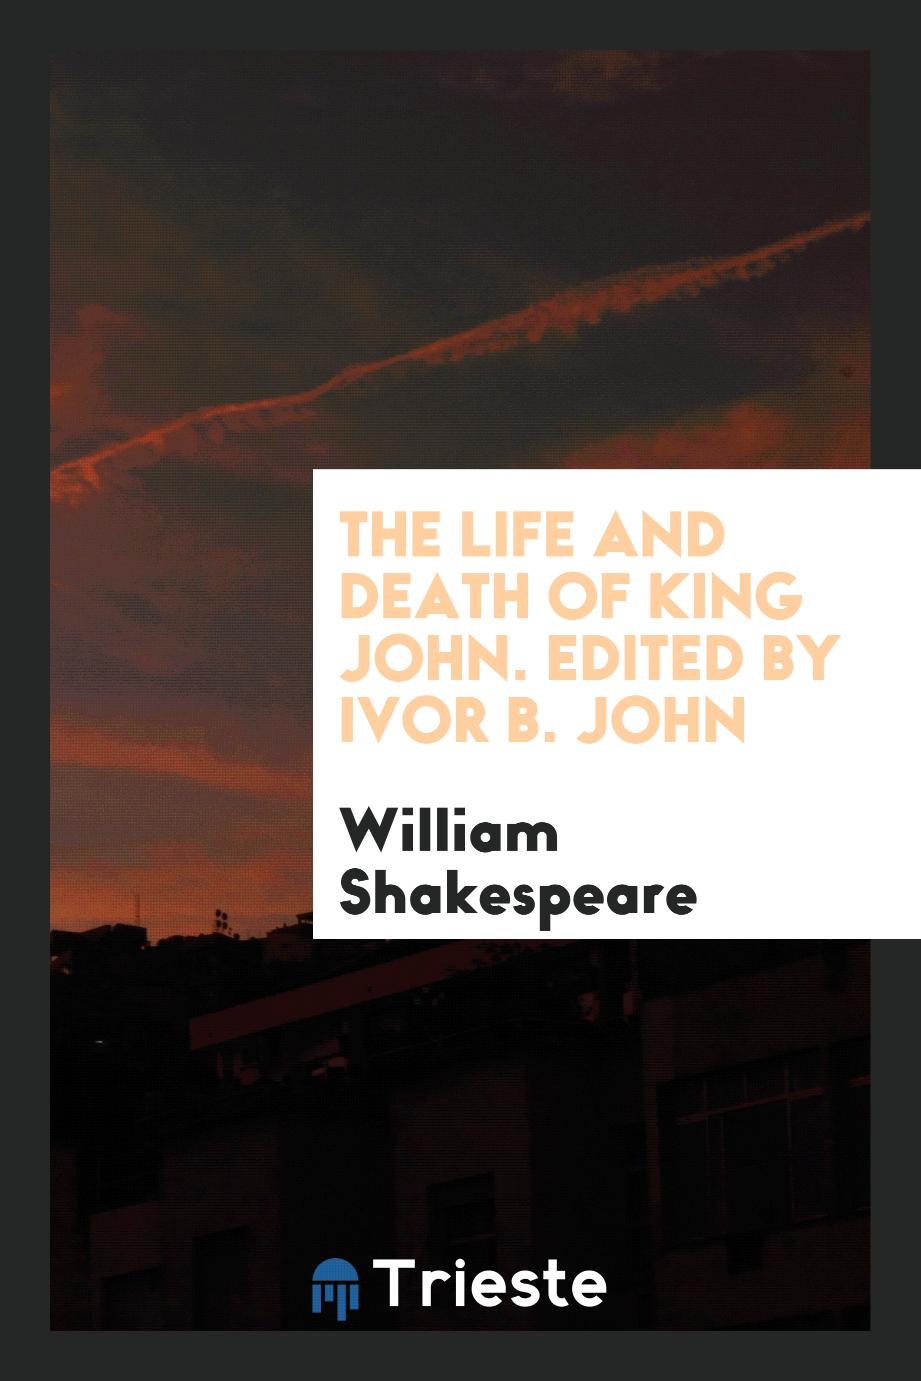 The life and death of King John. Edited by Ivor B. John